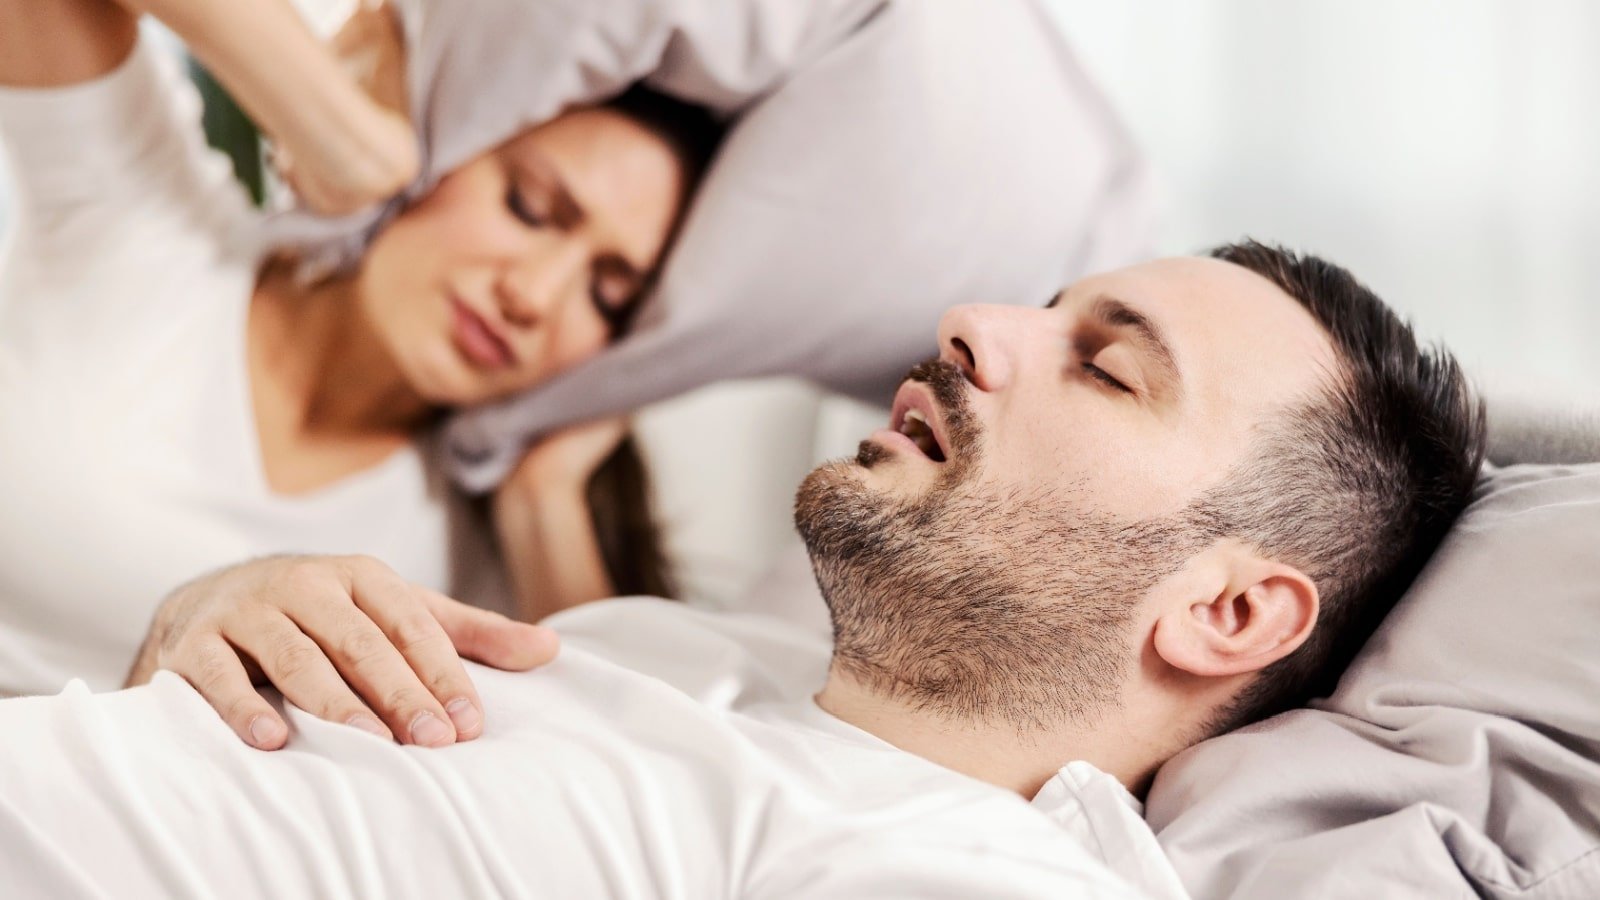 <p>Snoring is <strong><a href="https://www.hopkinsmedicine.org/health/wellness-and-prevention/why-do-people-snore-answers-for-better-health#:~:text=From%20gentle%20snuffles%20to%20loud,and%20possibly%20their%20own%2C%20too." rel="noopener">more common</a></strong> among individuals who are overweight, middle-aged or older men, and postmenopausal women, and tends to worsen with age.</p>